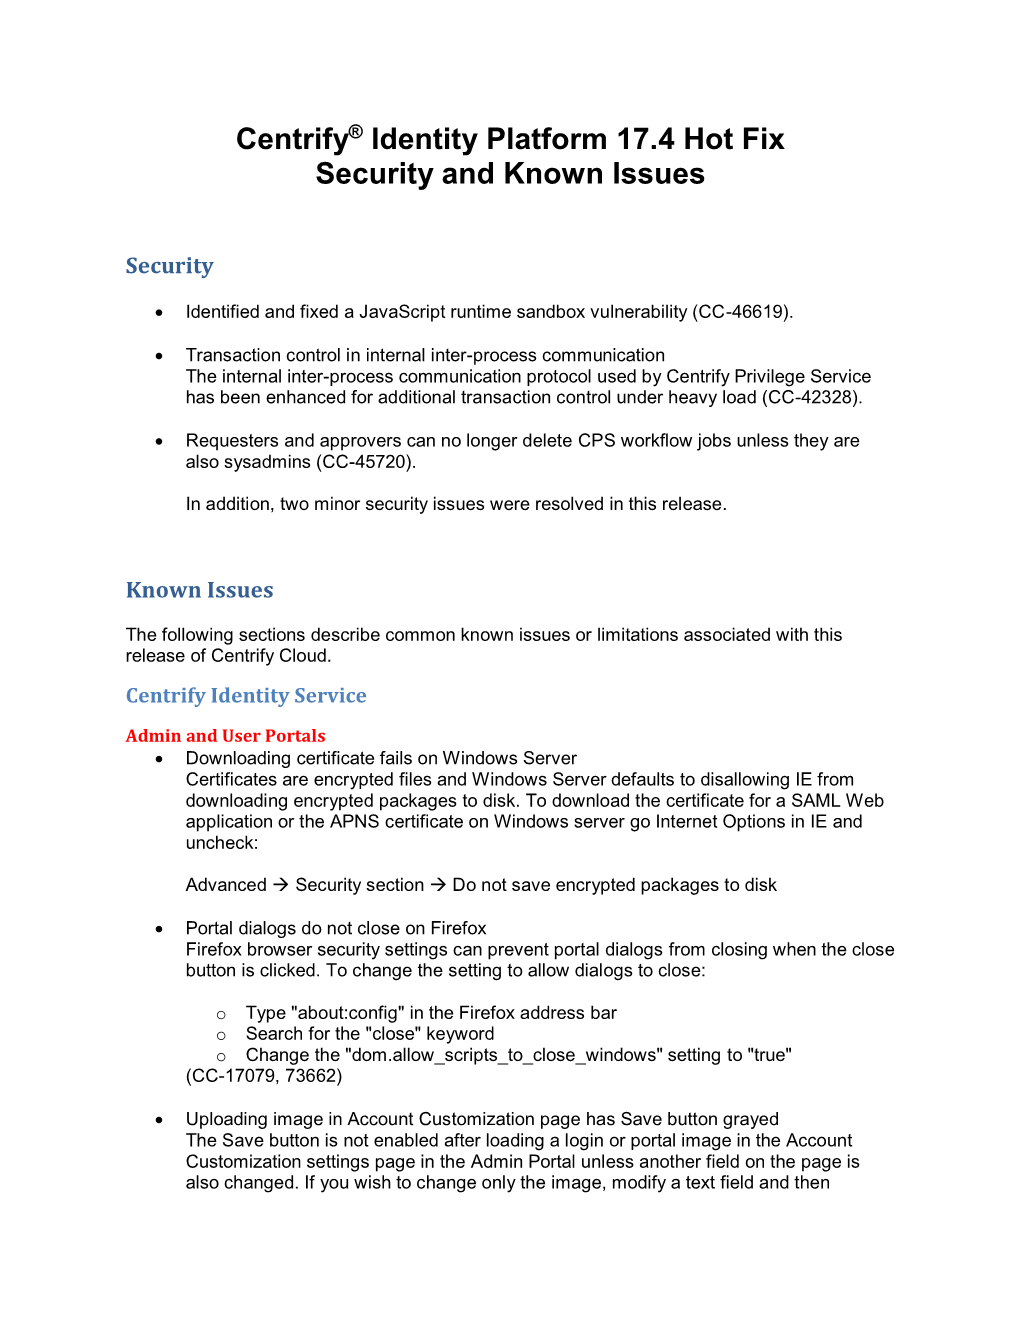 Centrify® Identity Platform 17.4 Hot Fix Security and Known Issues